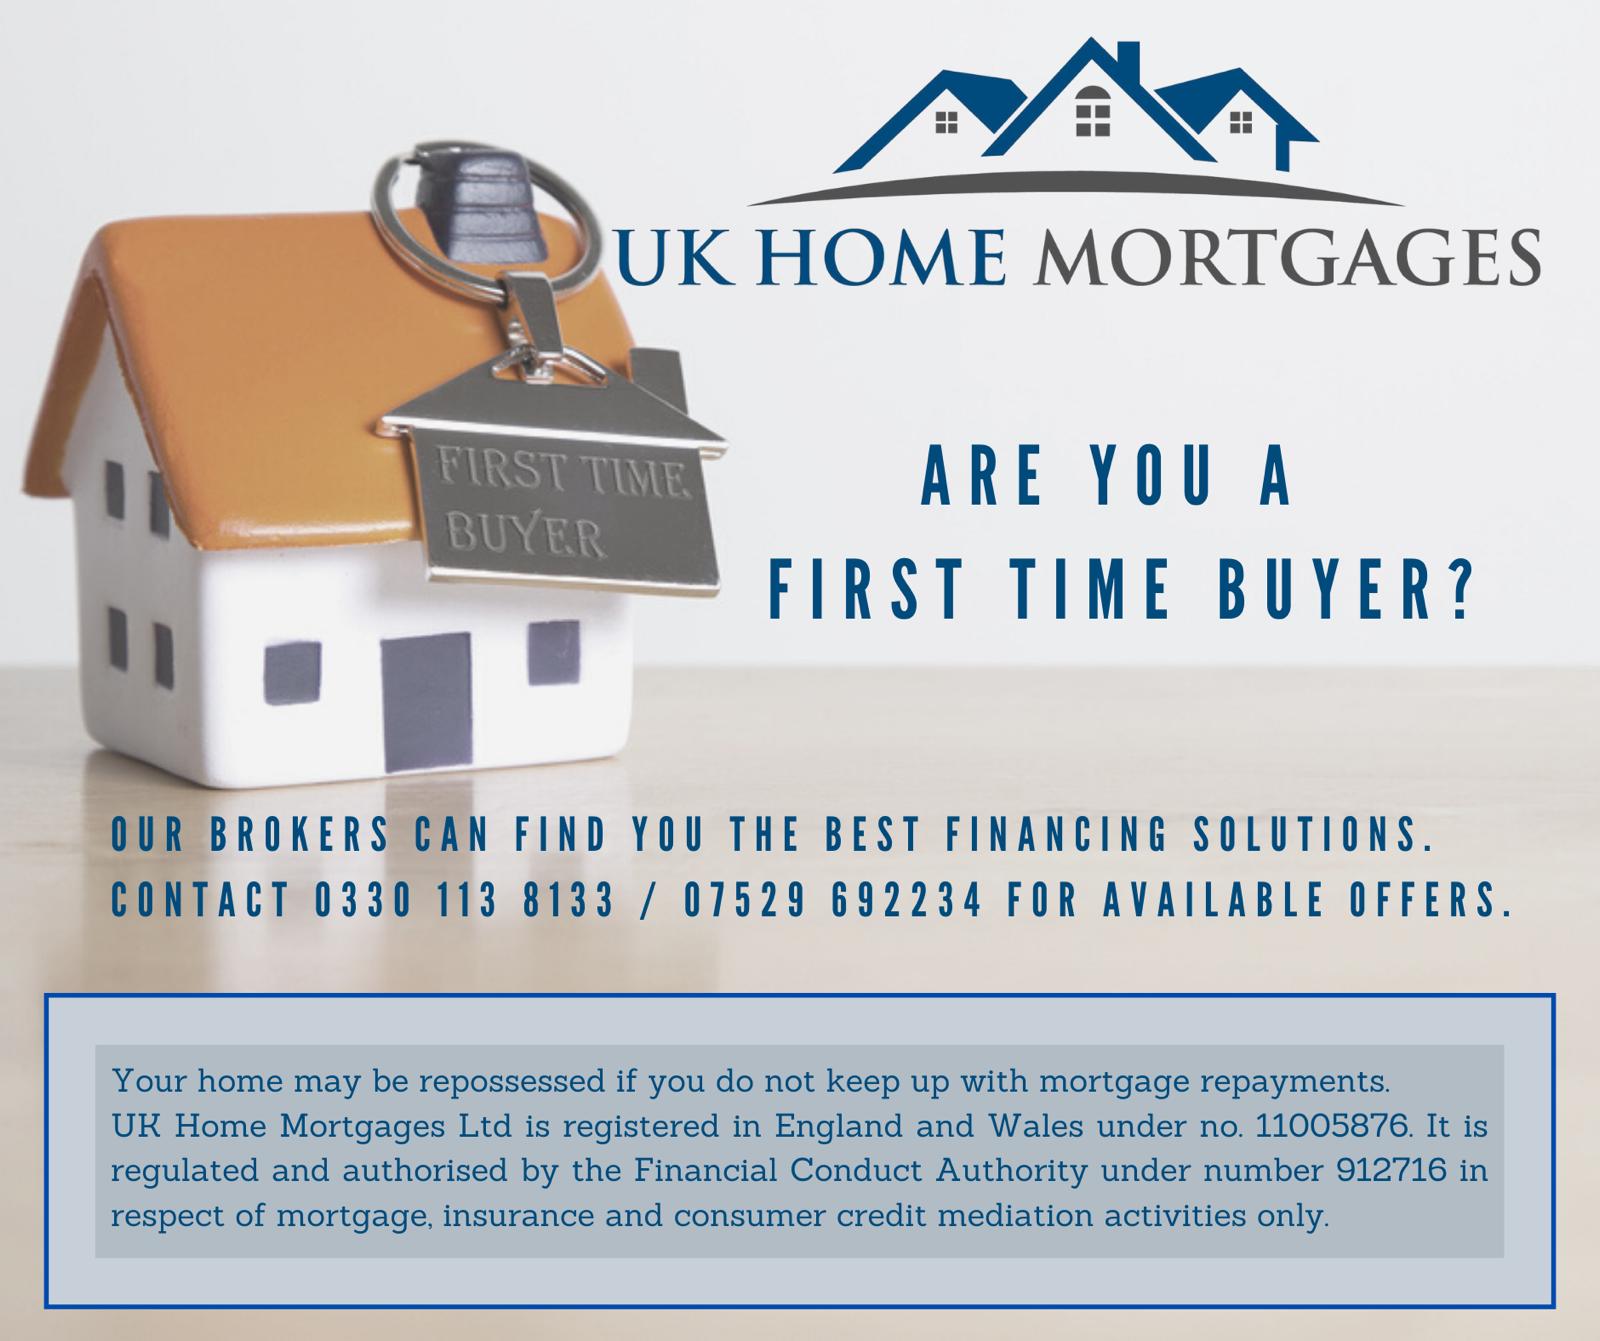 UK Home Mortgages